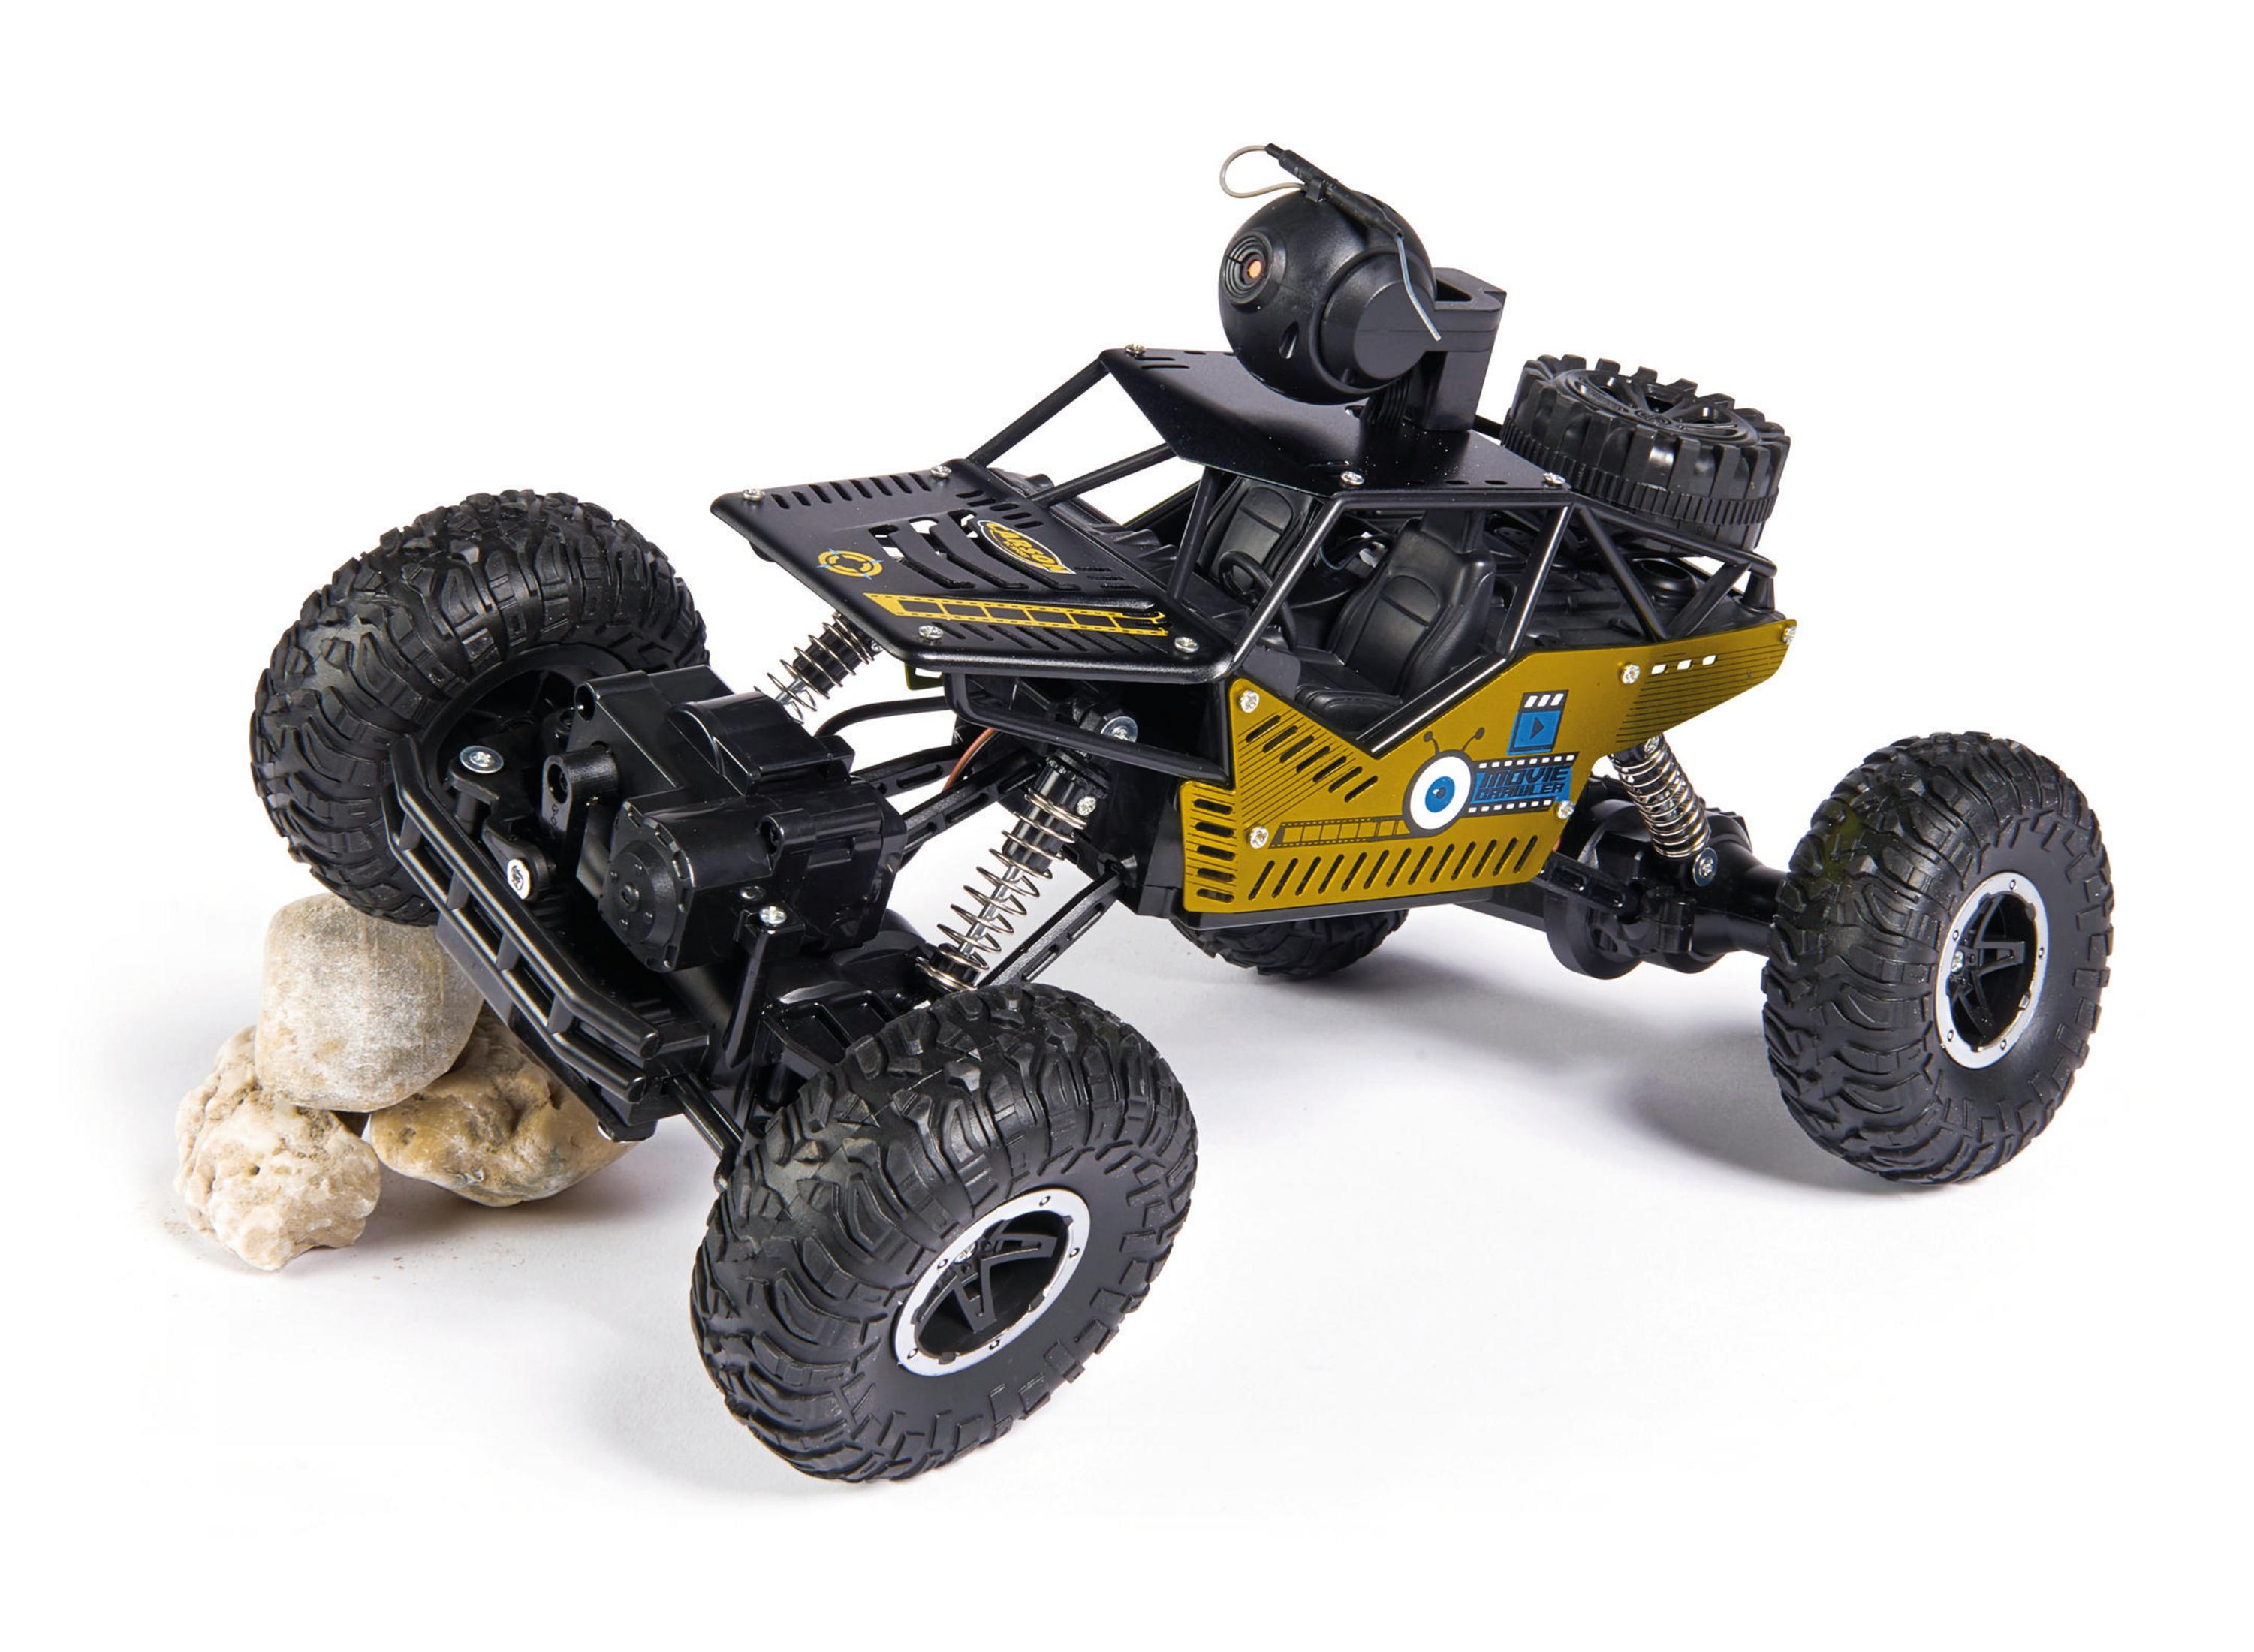 500404192 CARSON Gold 100%RTR CRAWLEE Spielzeugmodell, GOLD APP 1:14 2.4G MOVIE